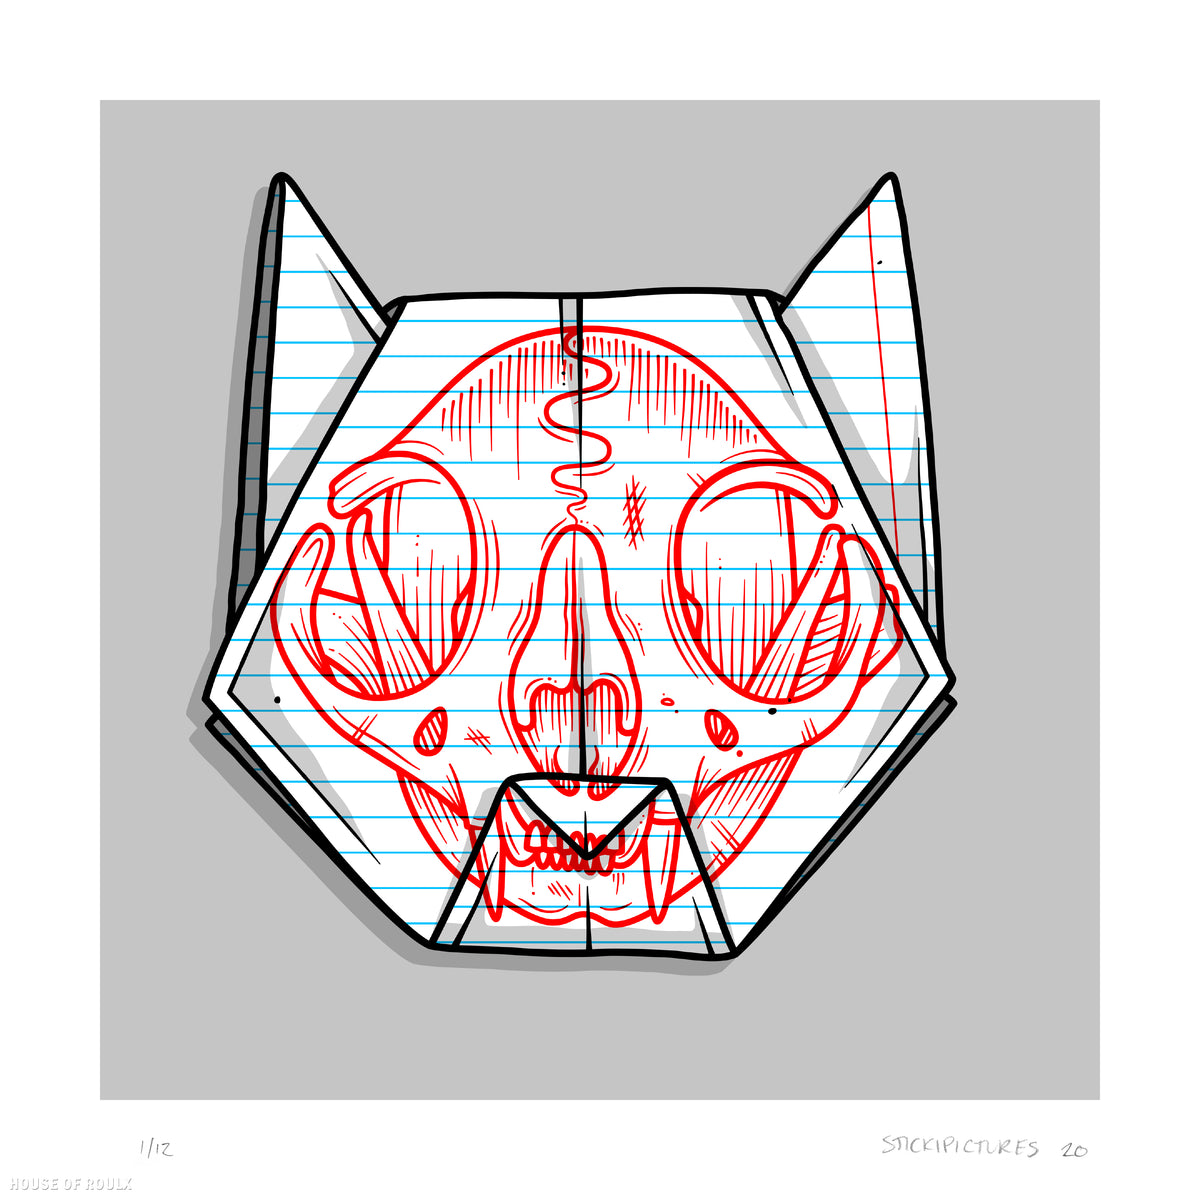 Stickipictures - &quot;Origami Cat Skull&quot; - Archival Print, Limited Edition of 12 - 12 x 12&quot;